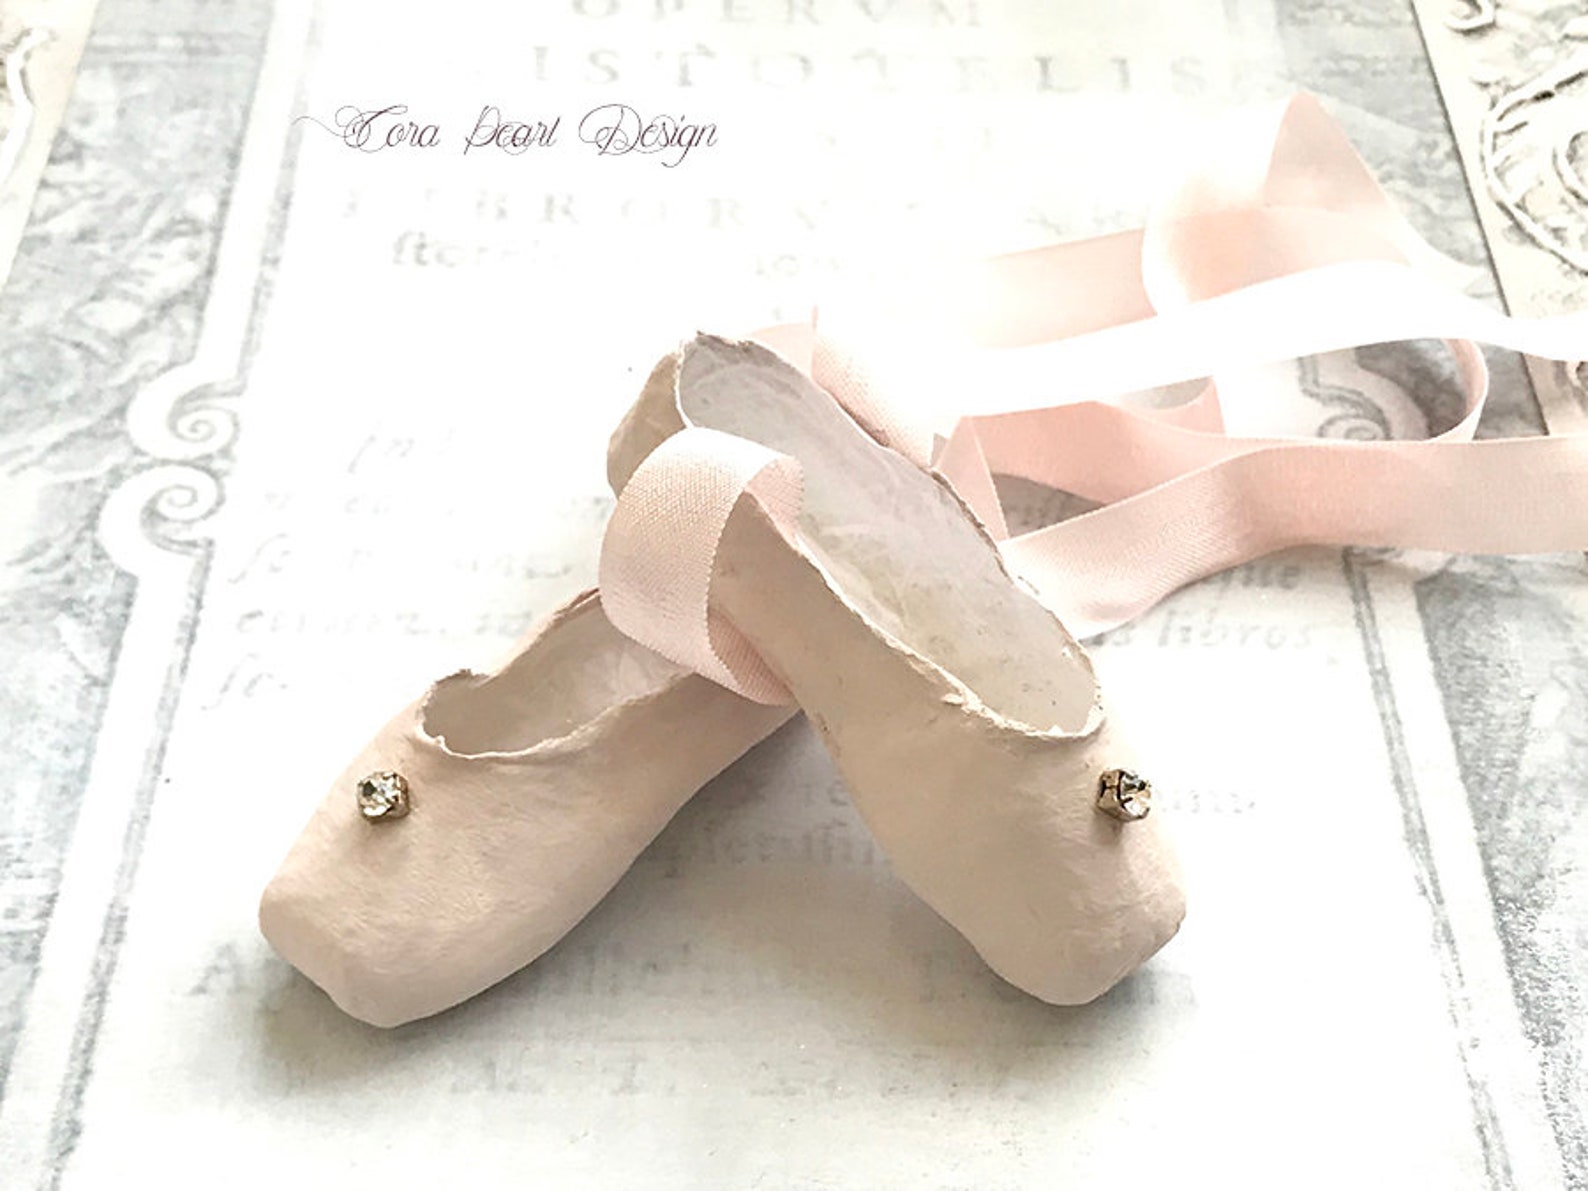 single vintage rhinestone pink paper miniature pointe shoes in gift box - paper ballet shoes - paper sculpture - ballet gifts